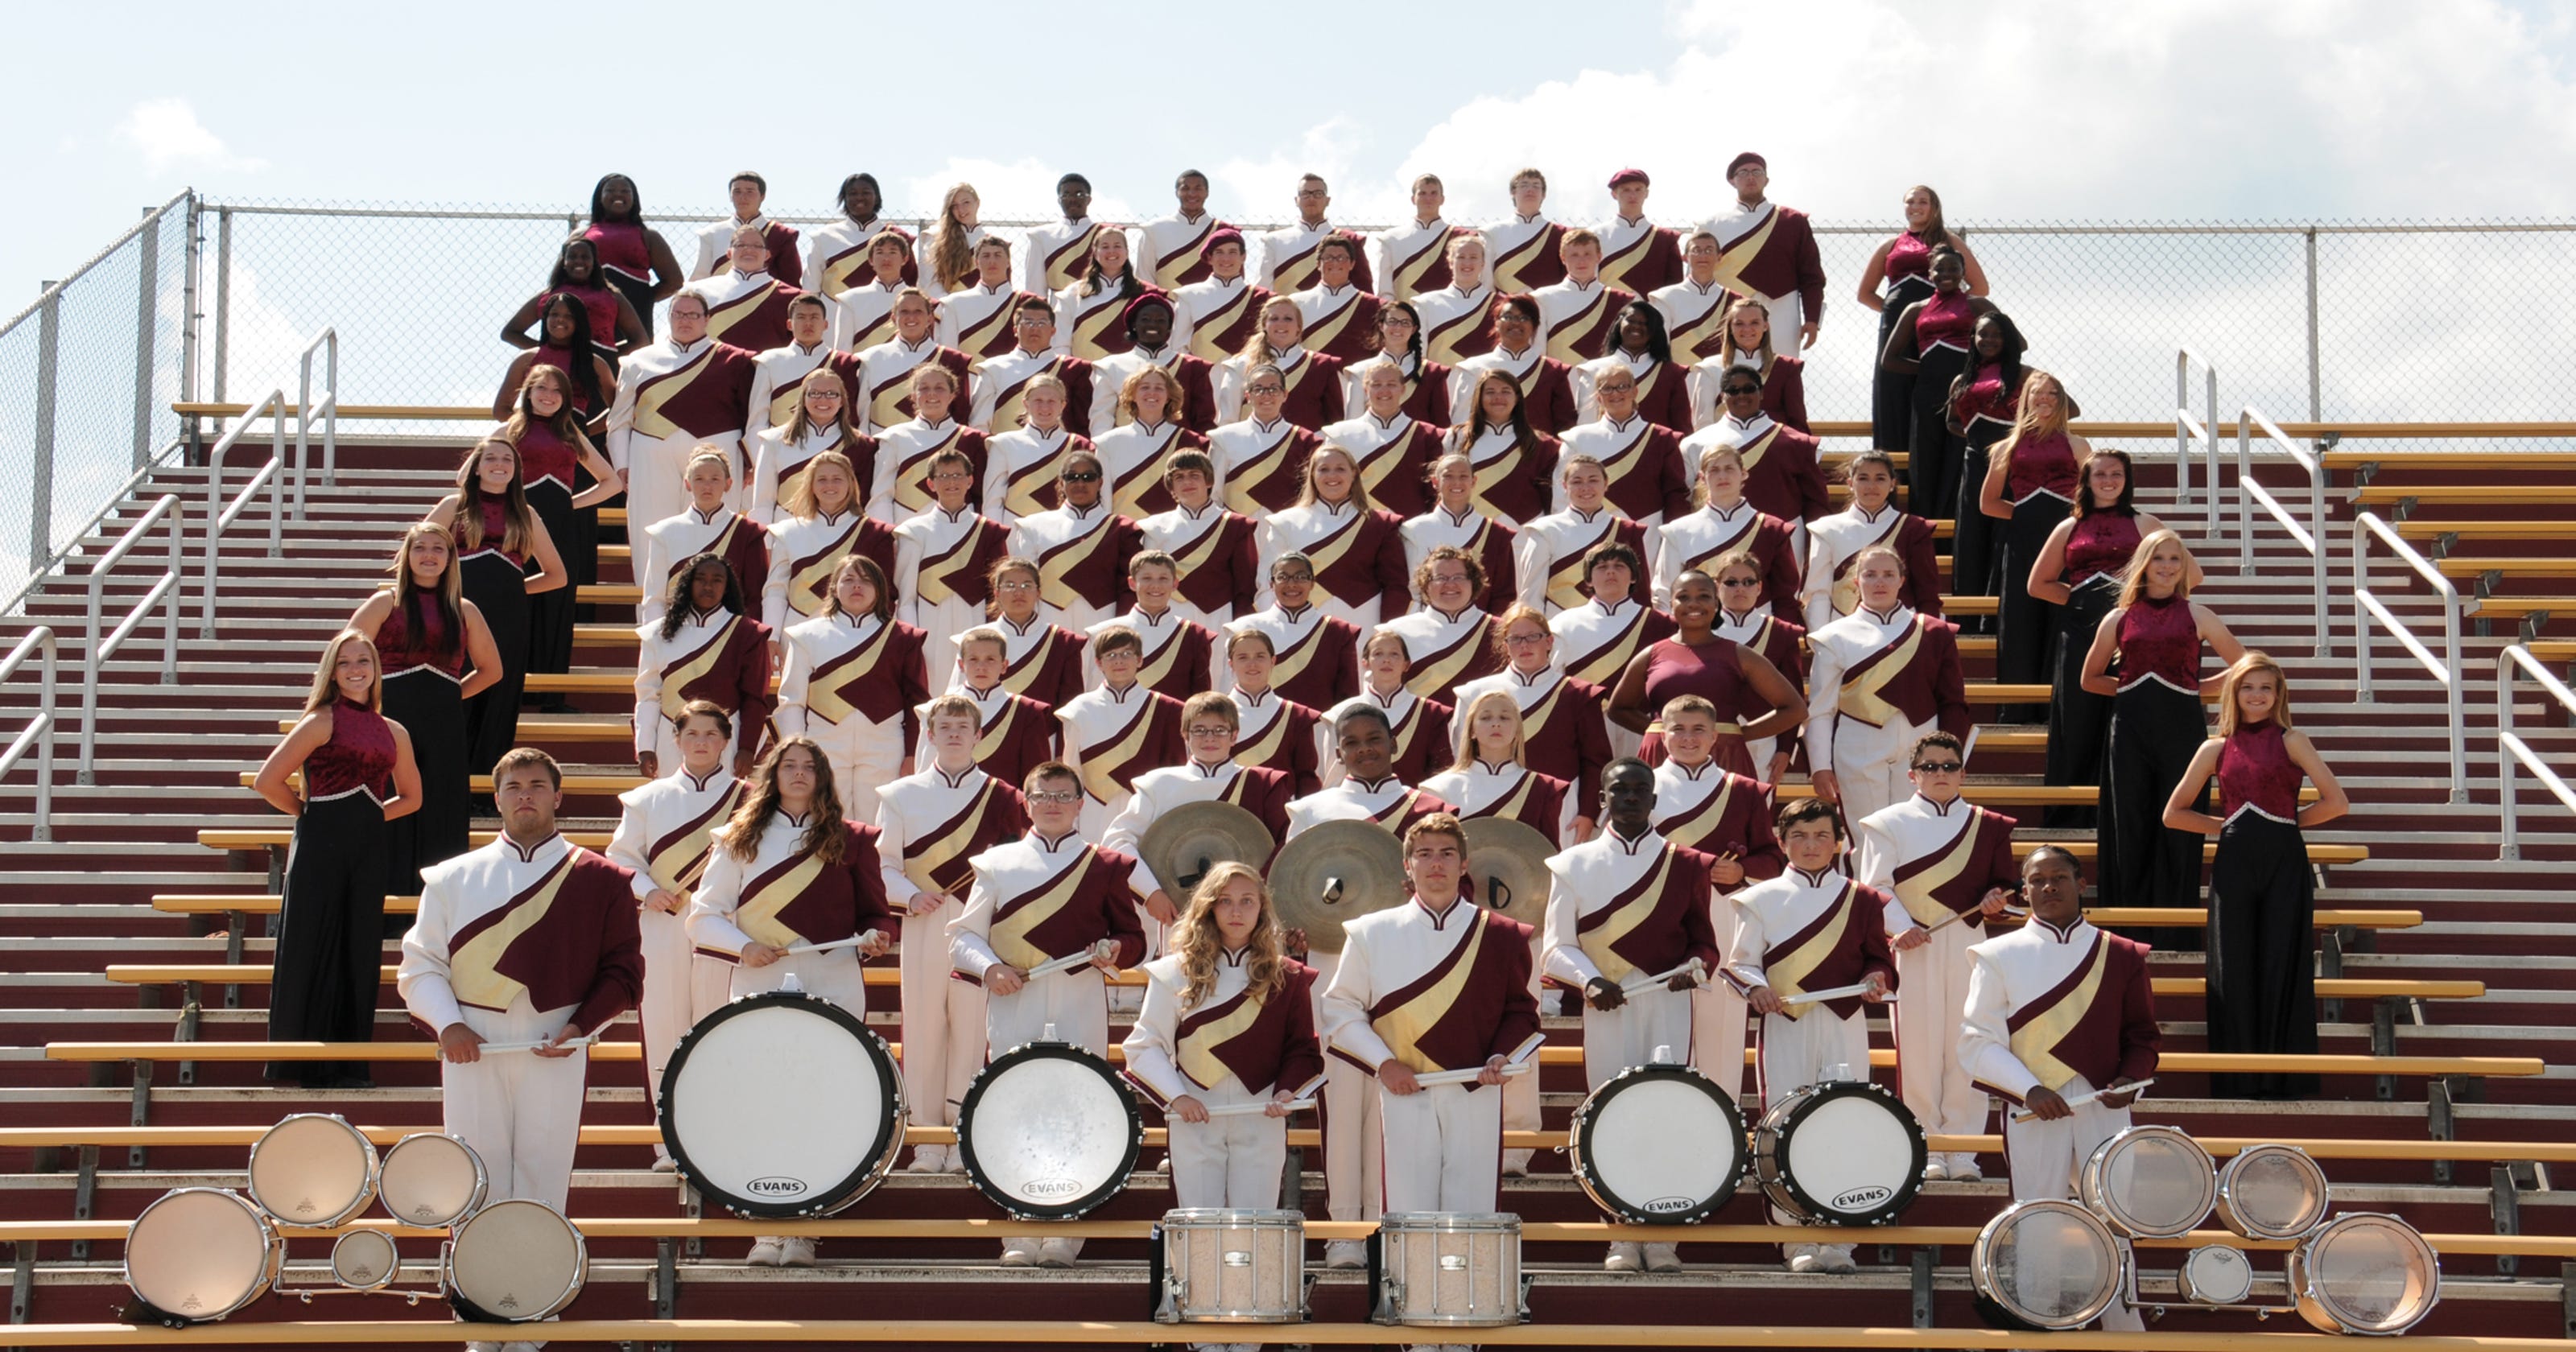 Licking Heights band excited for appearance at state